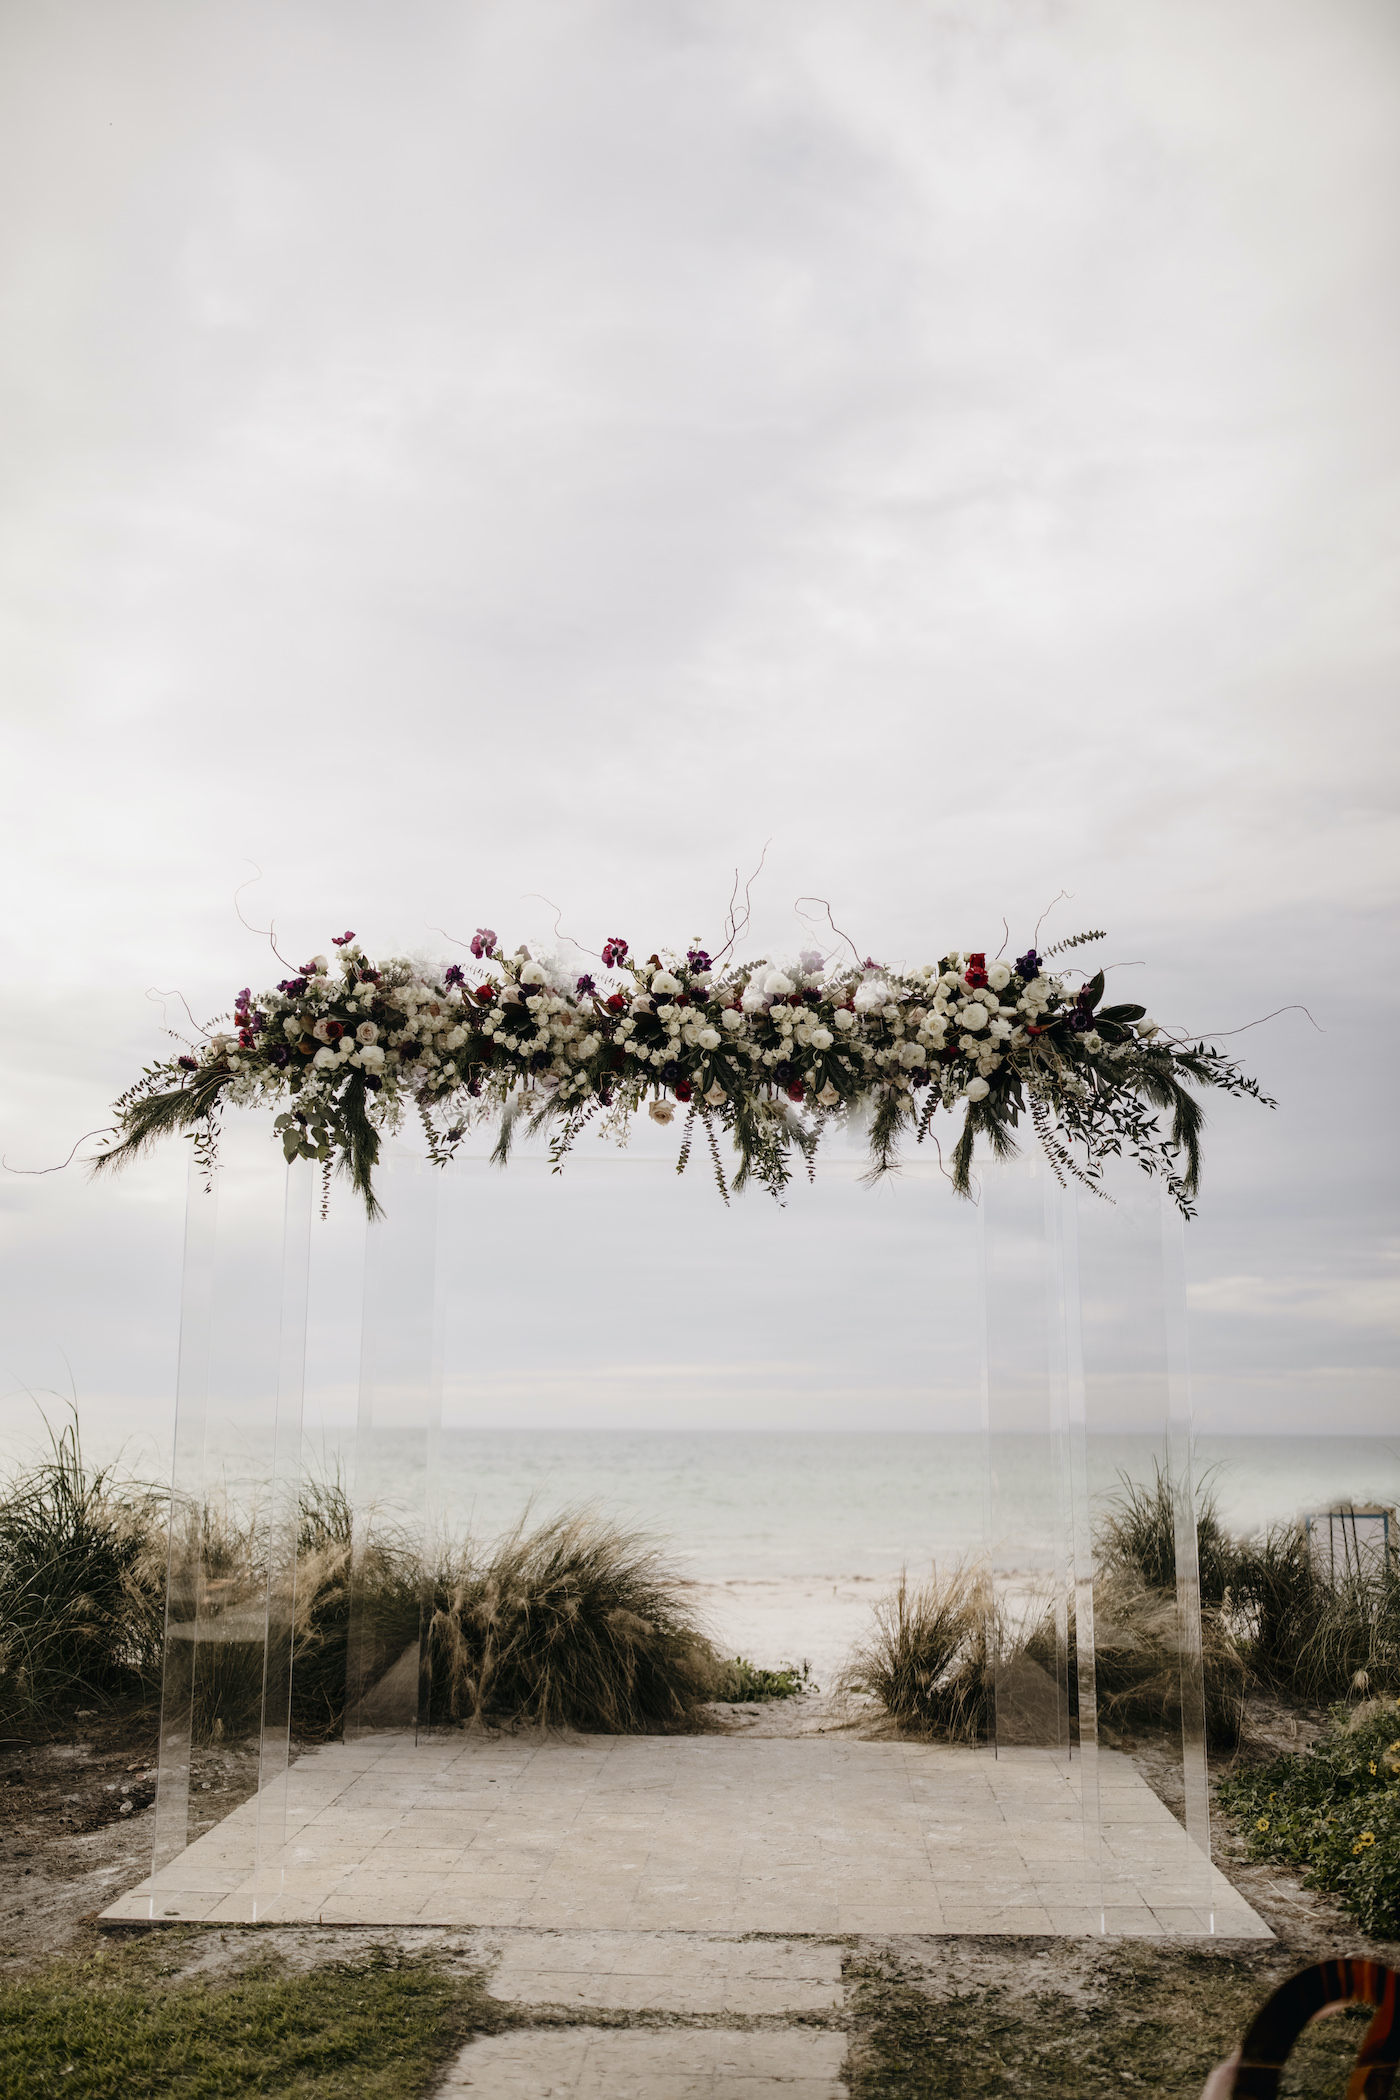 Sarasota Outdoor Beach Wedding Ceremony on Siesta Key | Acrylic Four Post Arbor Backdrop with White and Deep Red and Blush Pink Floral Arrangement Garland with Eucalyptus Greenery